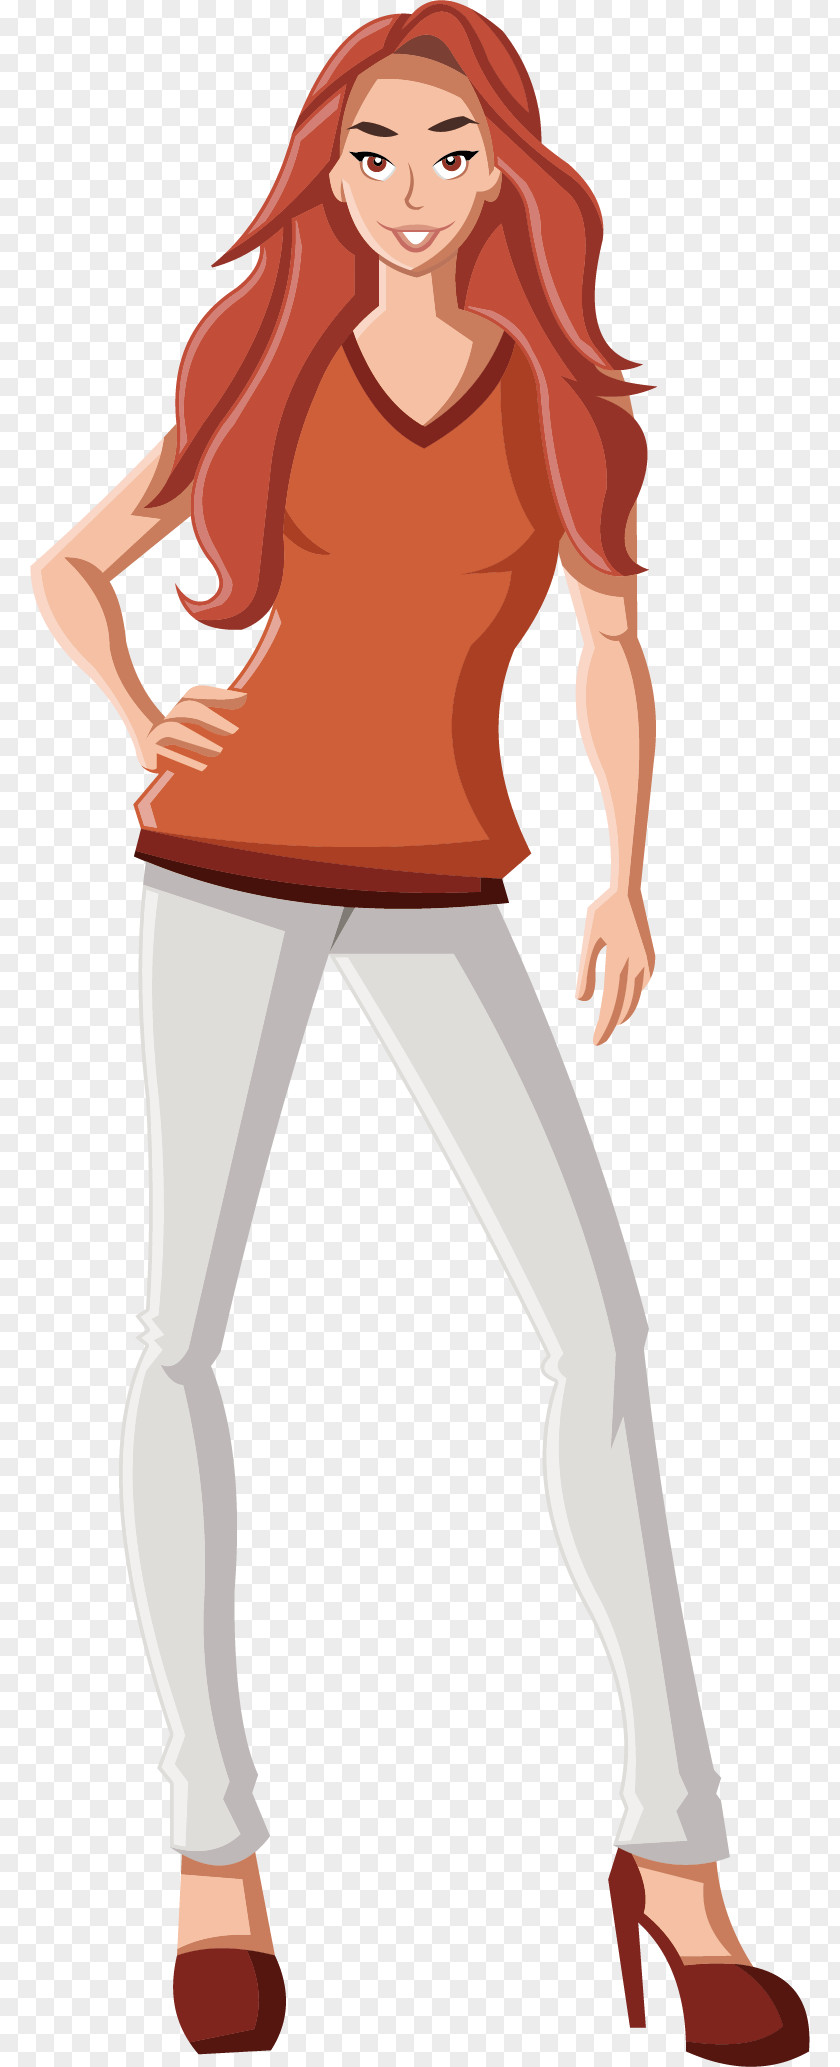 Long Haired Woman PNG